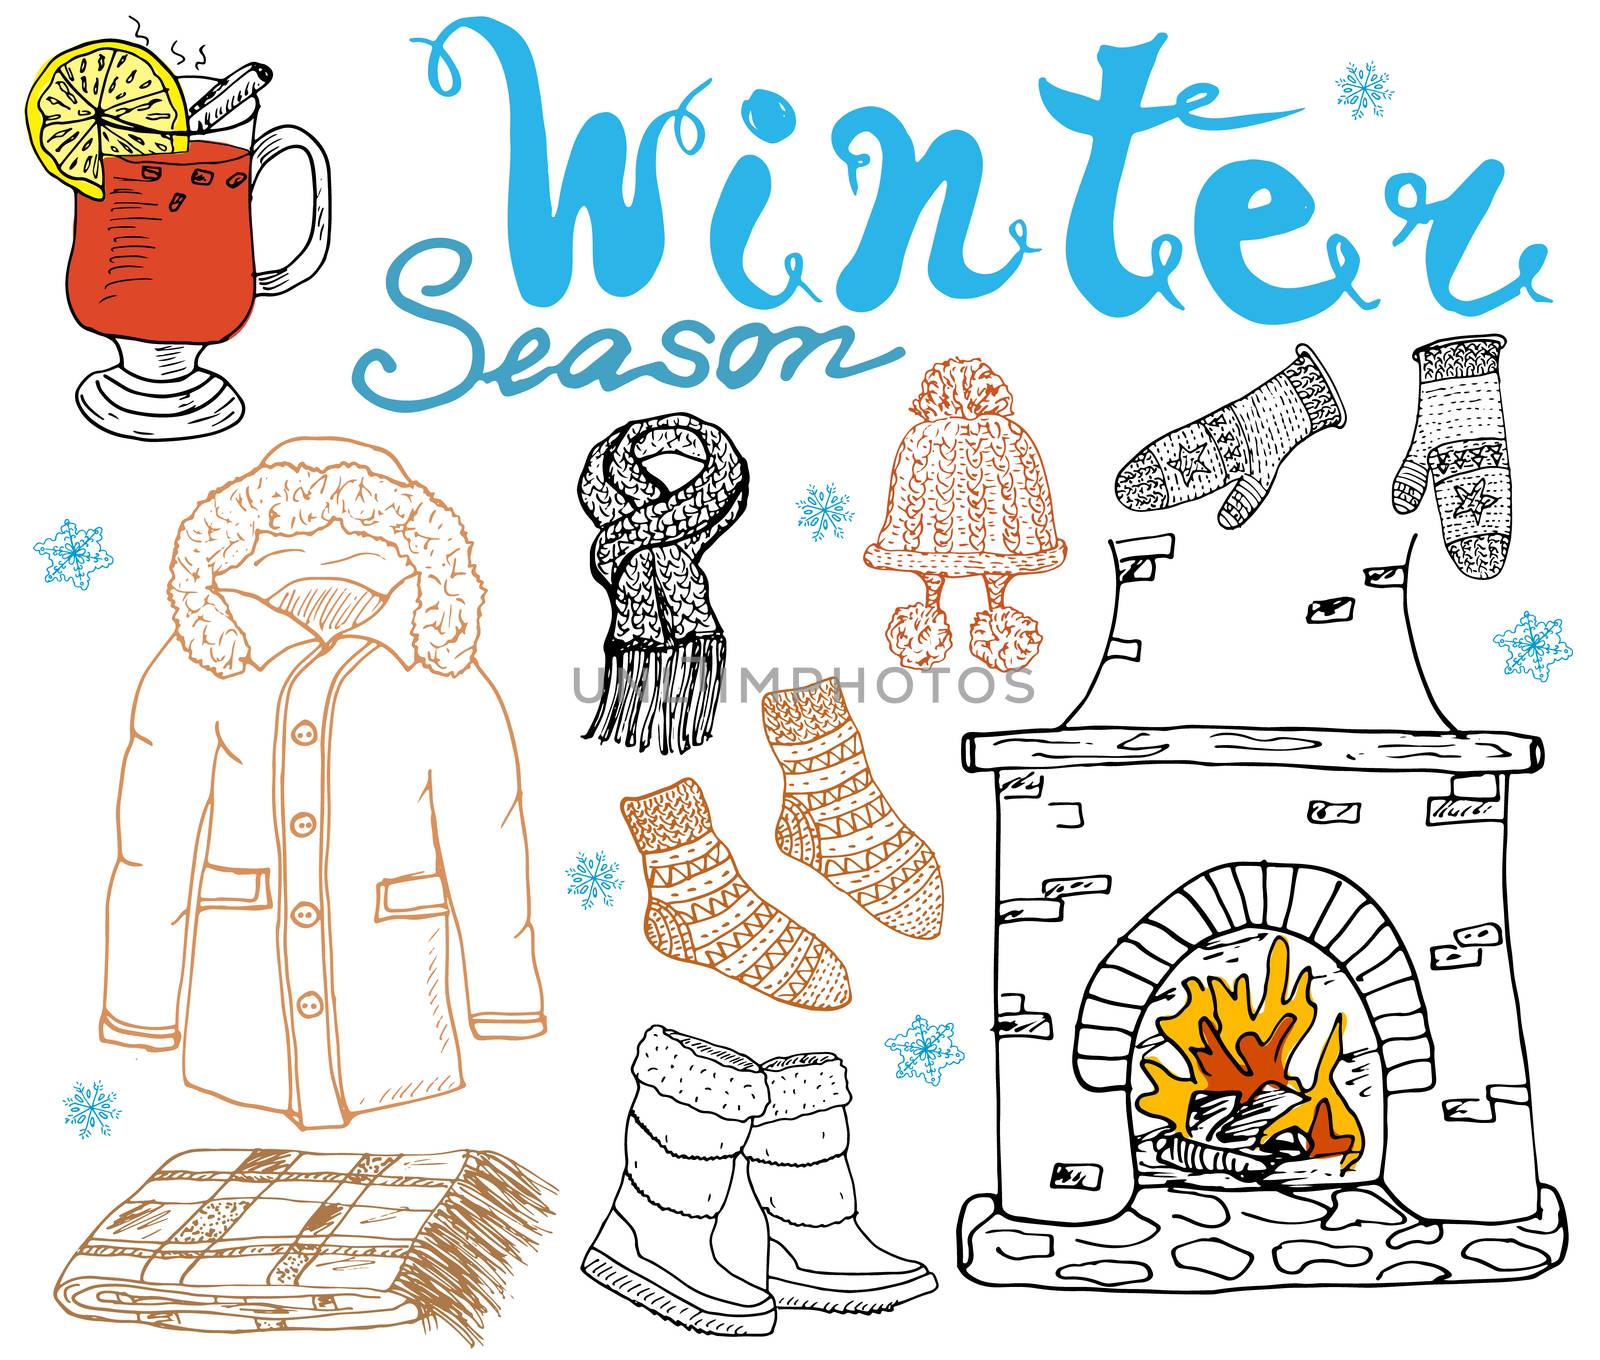 Winter season set doodles elements. Hand drawn set with glass of hot wine, boots, clothes, fireplace, warm blanket, socks and hat, and lettering words. Drawing set isolated on white.